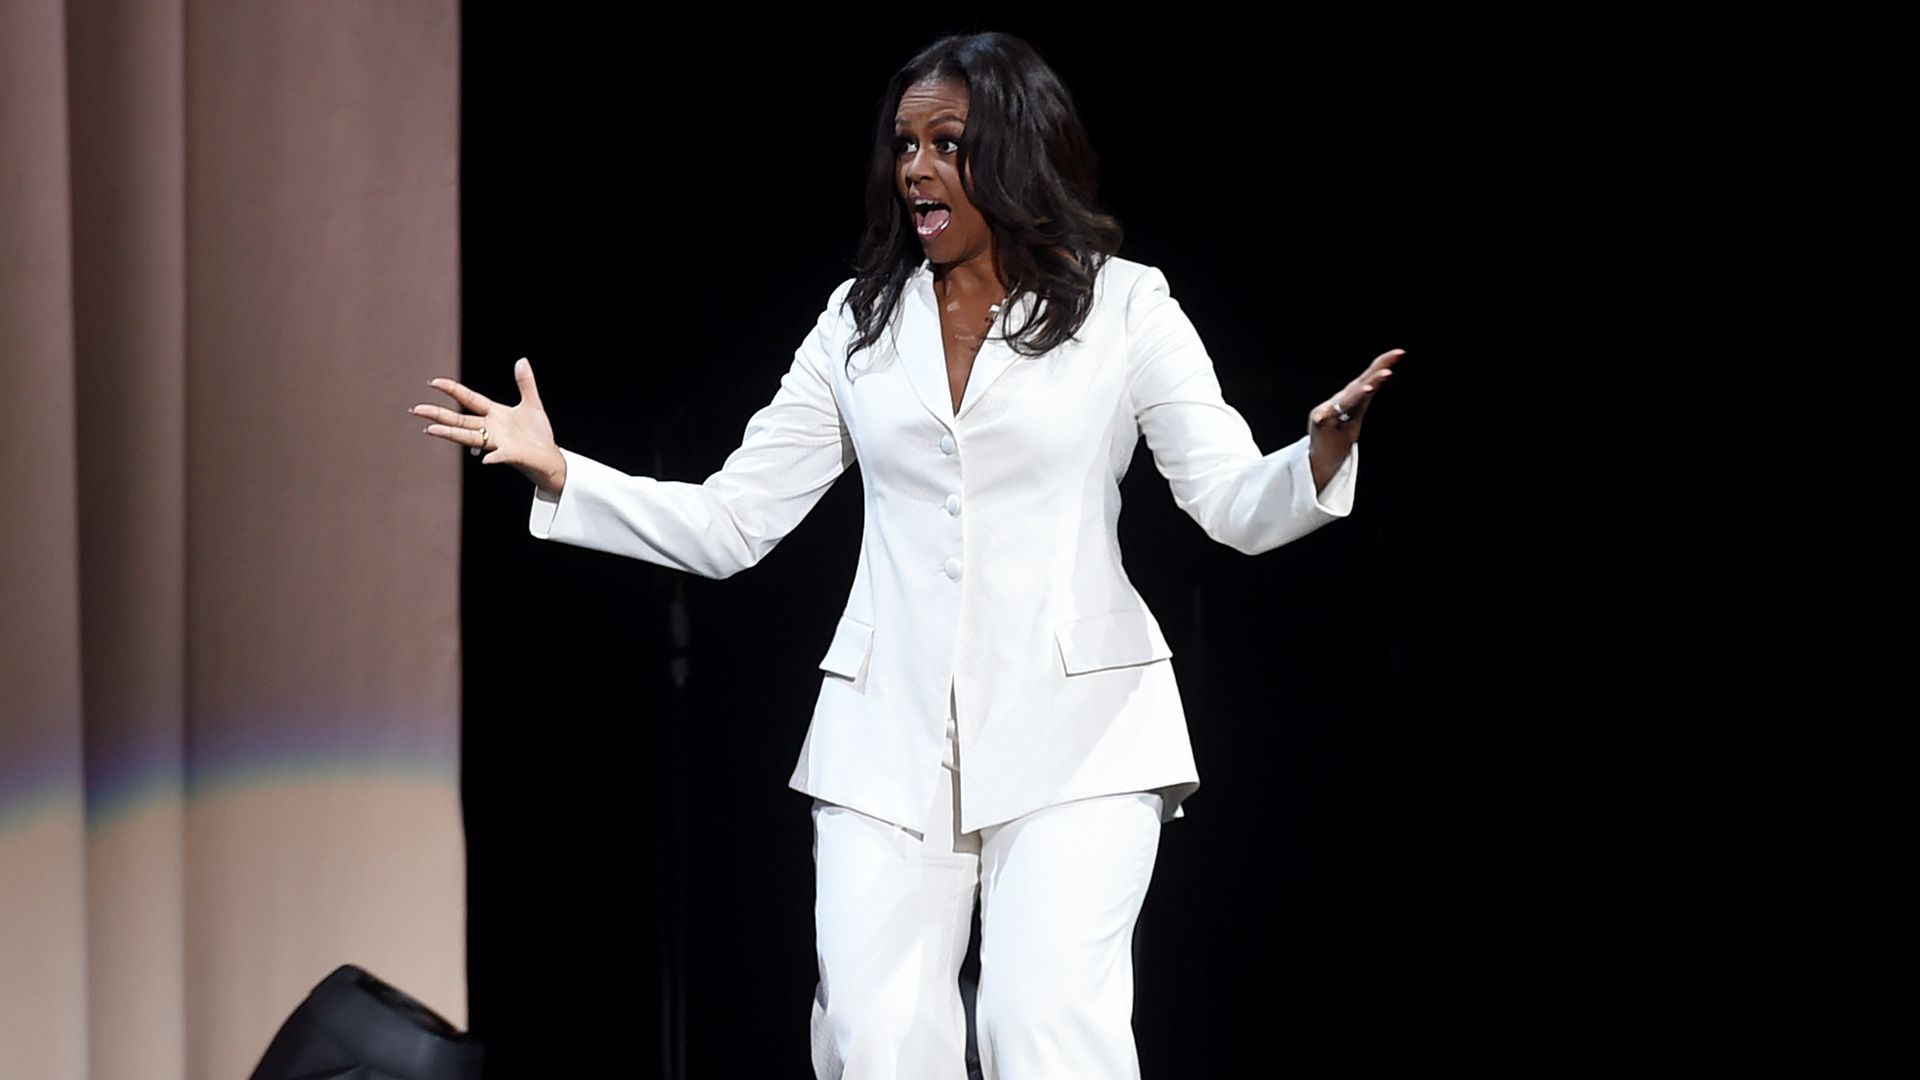 Michelle Obama gestures enthusiastically on stage